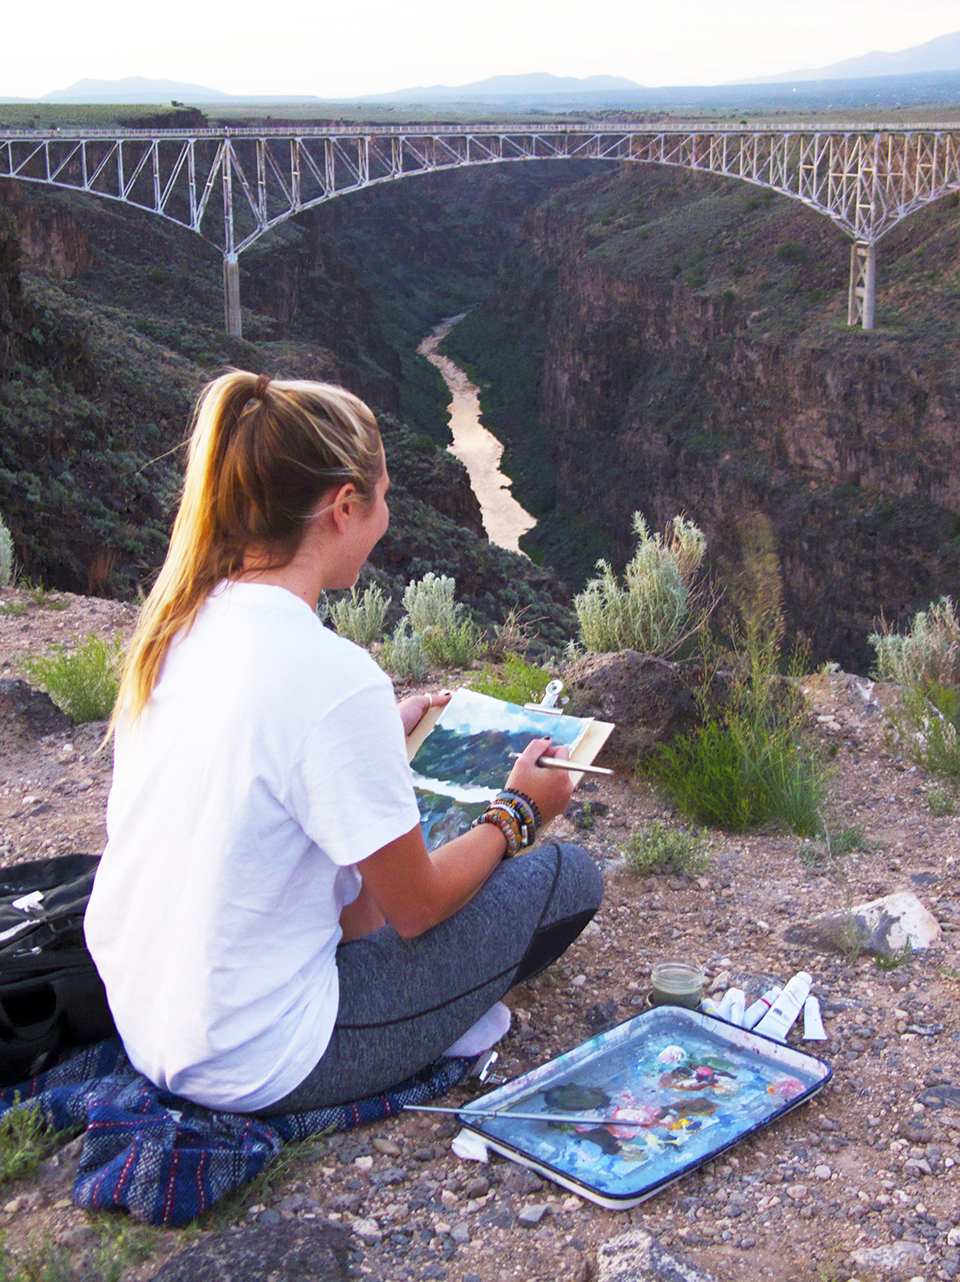 And SMU-in-Taos student sits on the rim of a canyon and paints a bridge.